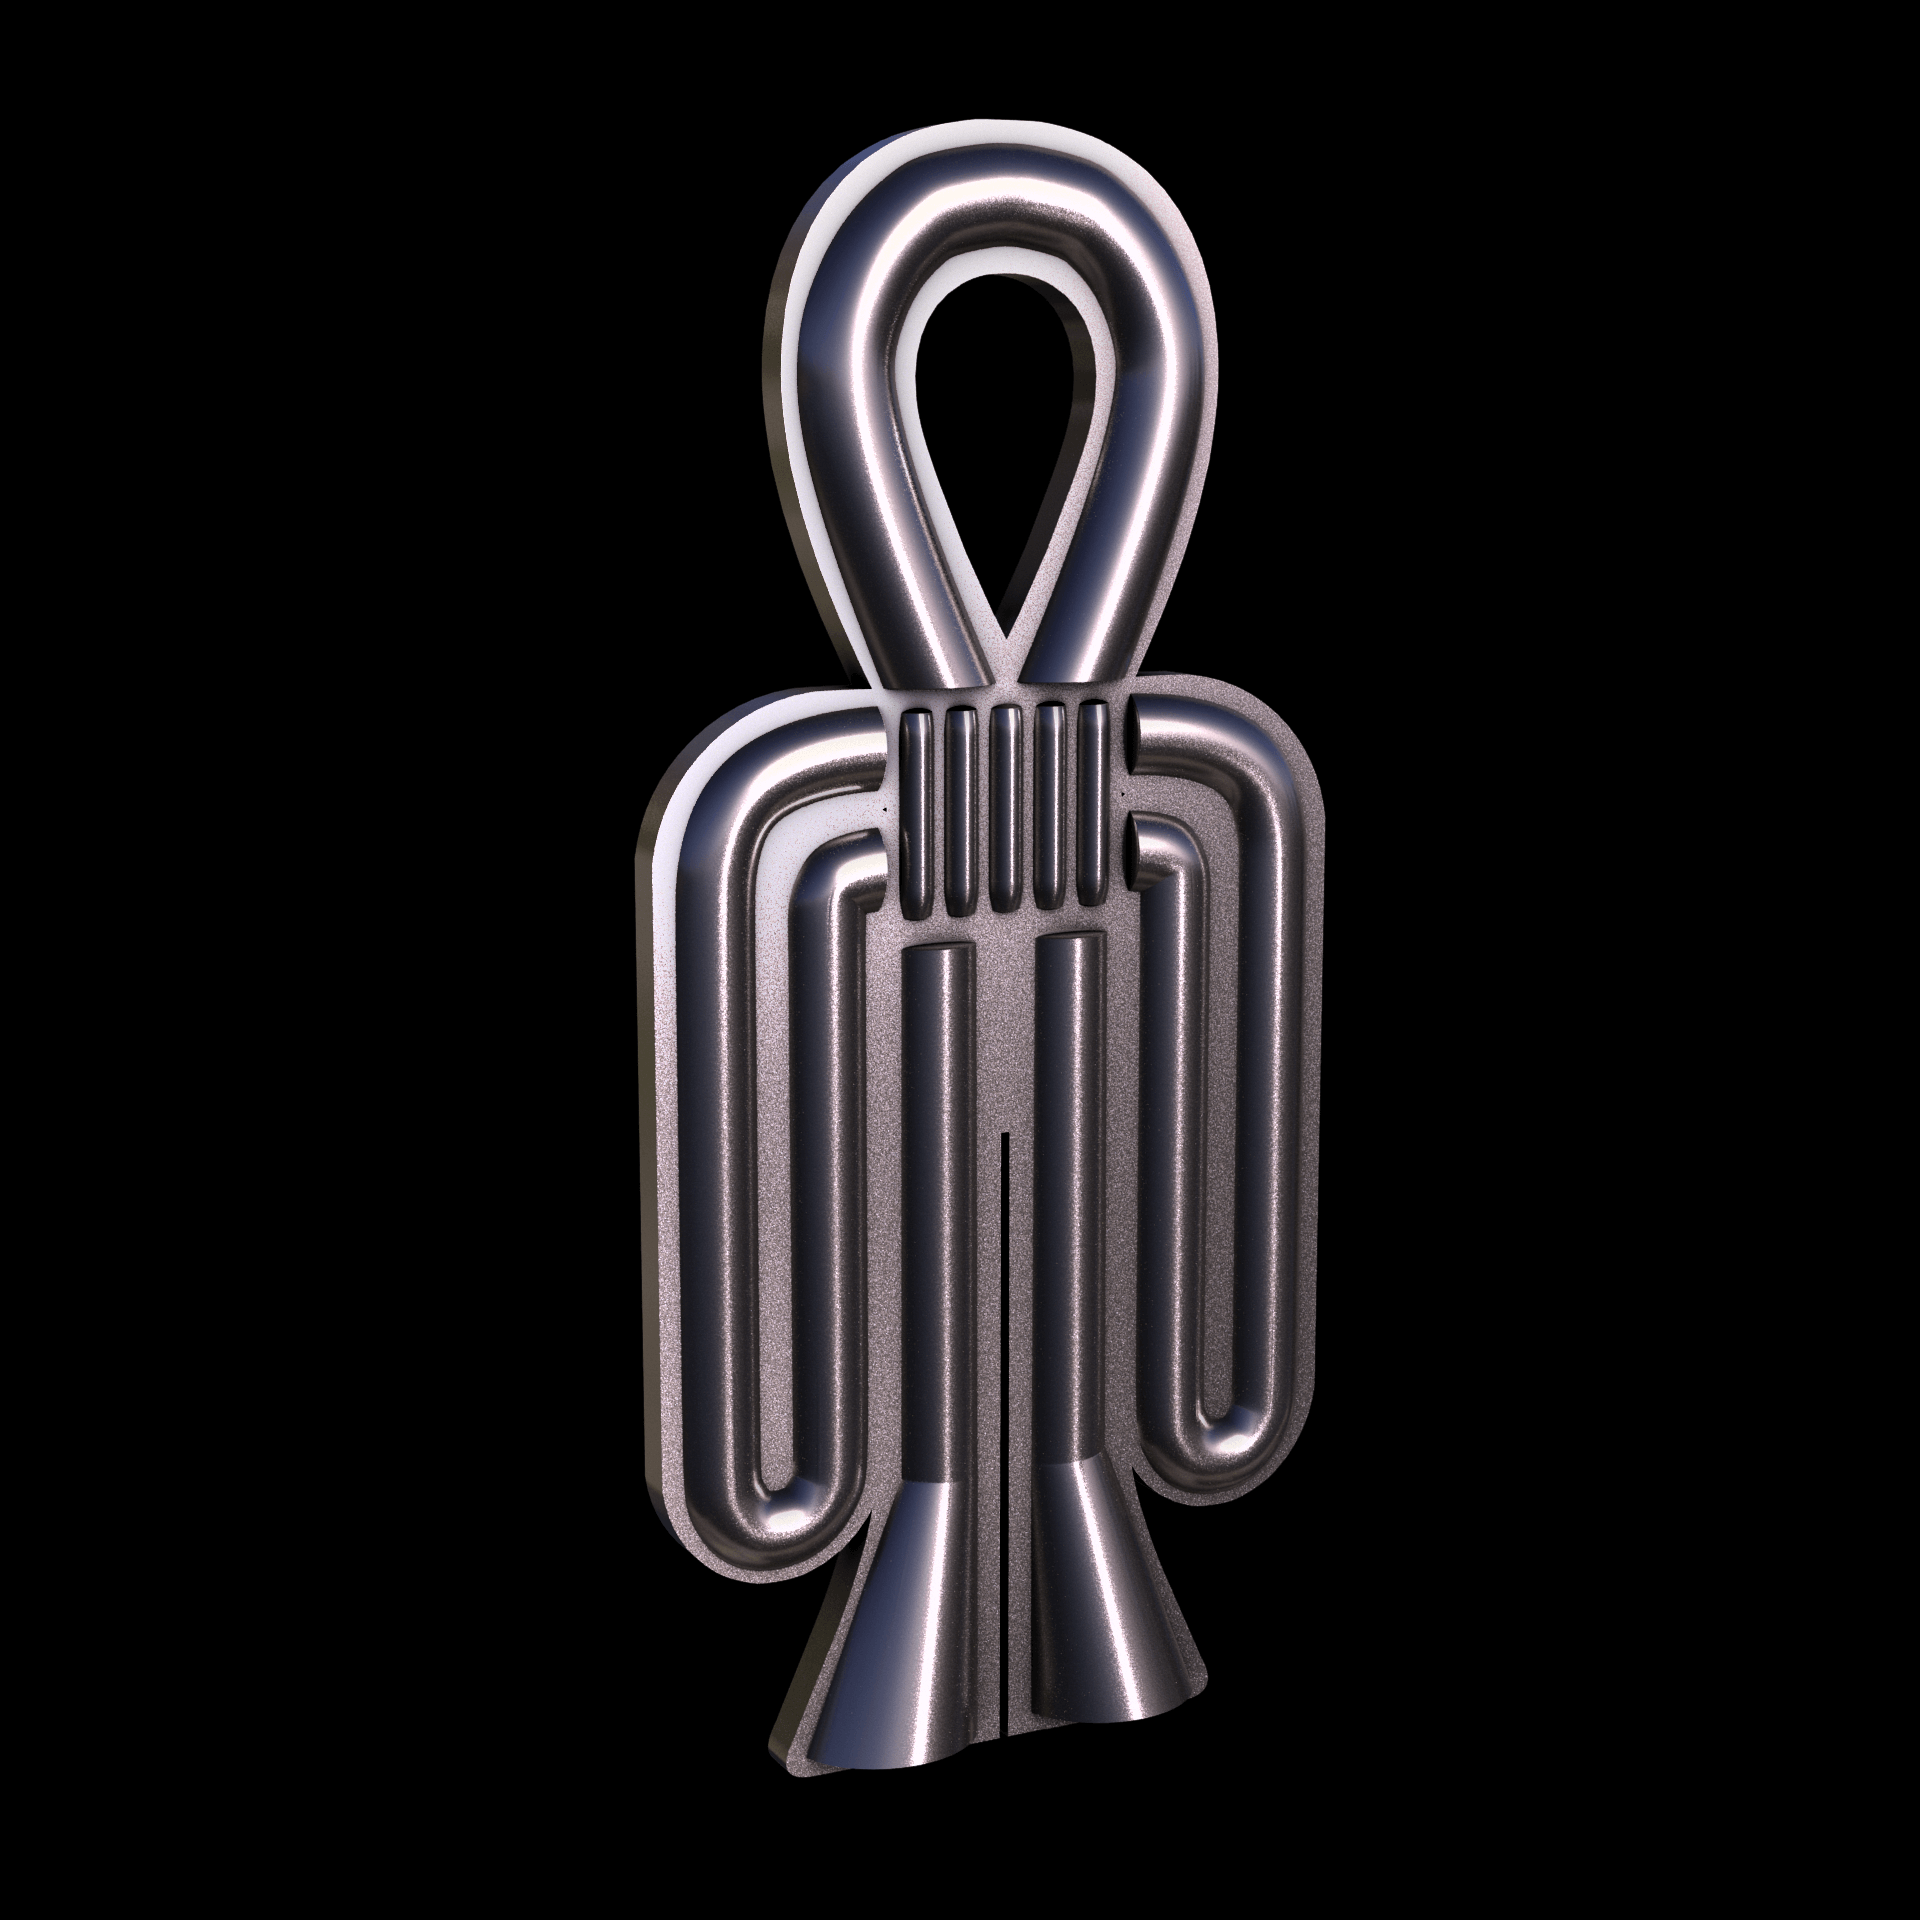 Bronze infused 420 stainless steel, manufactured using 3D printing, polished and plated in nickel for a silvery hue with a mild sheen, with visible print lines.